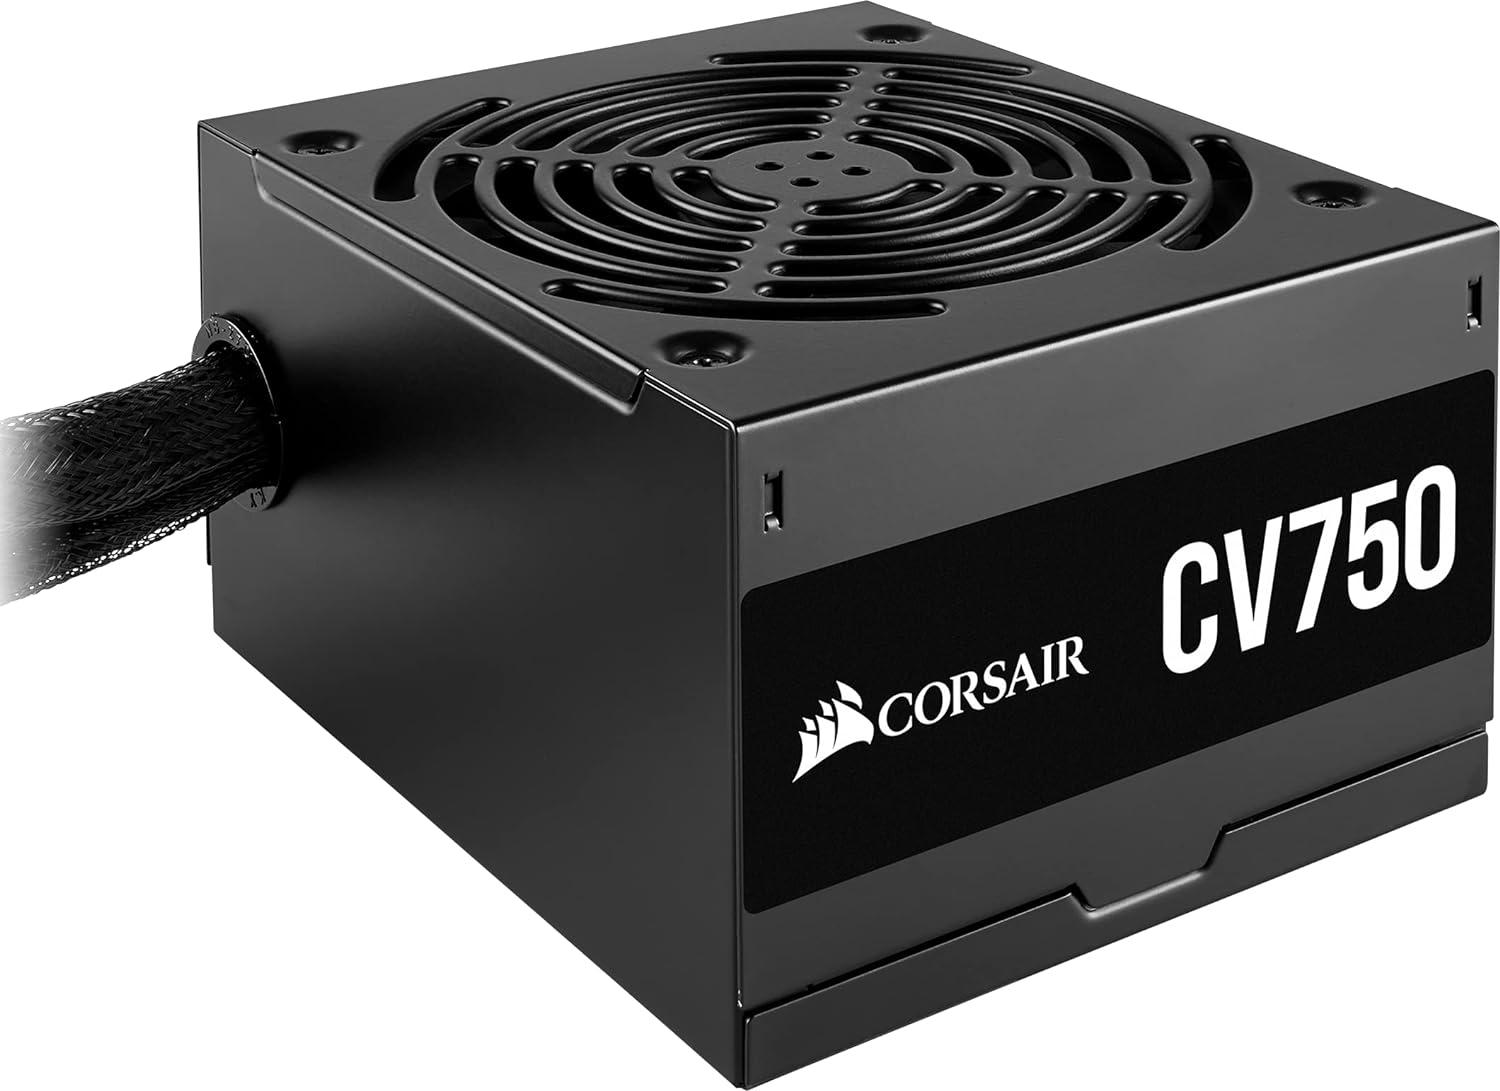 CP-9020237-UK - 750 Watts Power Supply - Low-noise cooling fan for quieter operation under varying loads. 0840006630319